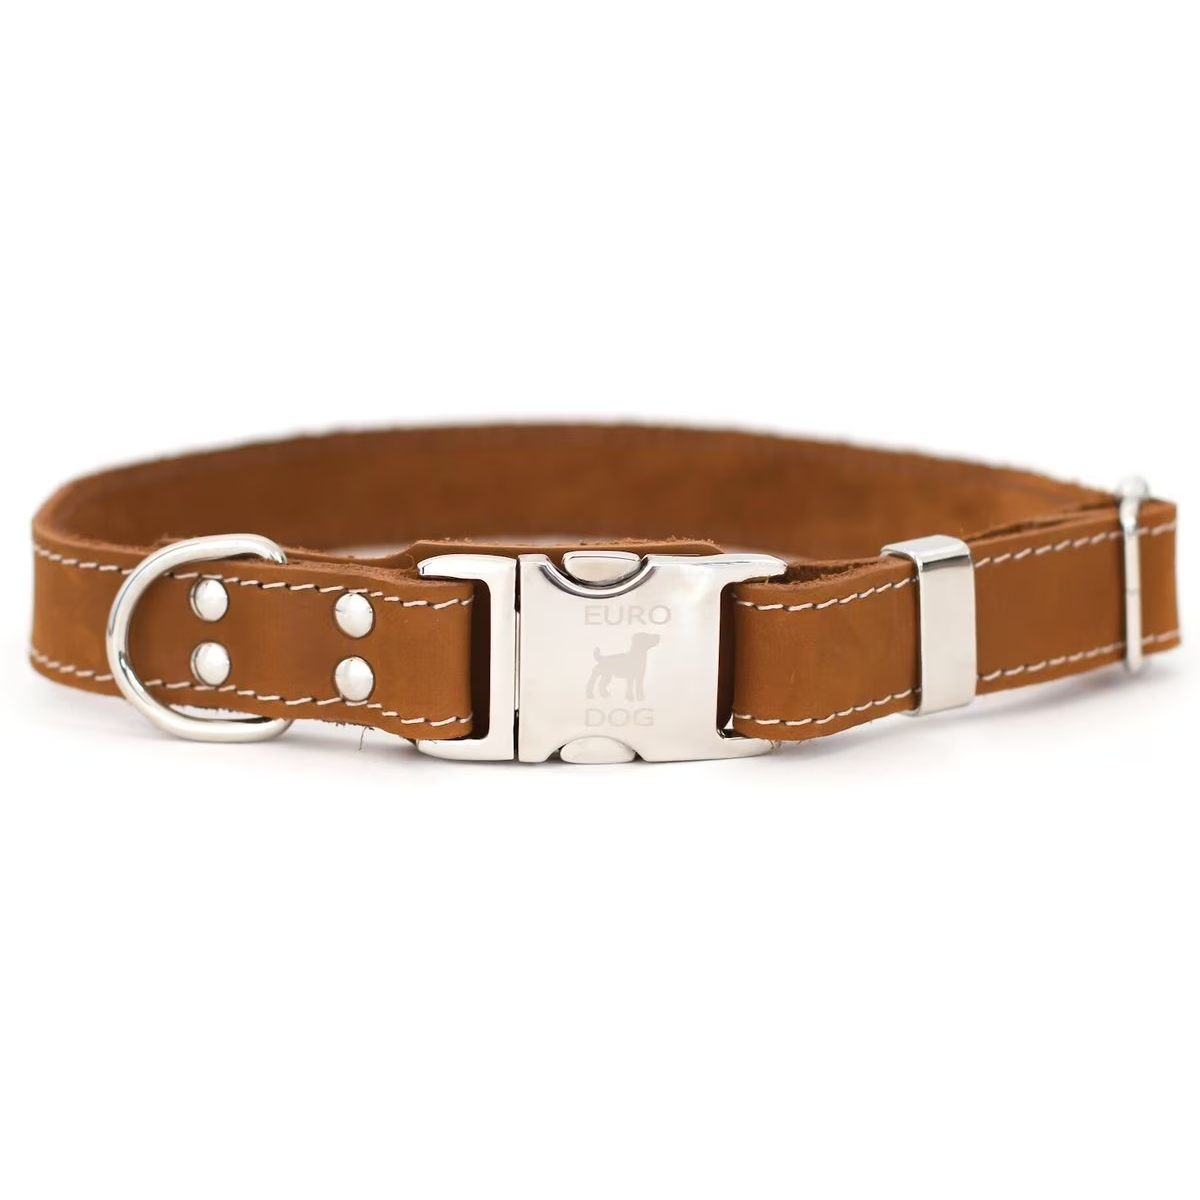 Euro-Dog Quick Release Leather Dog Collar